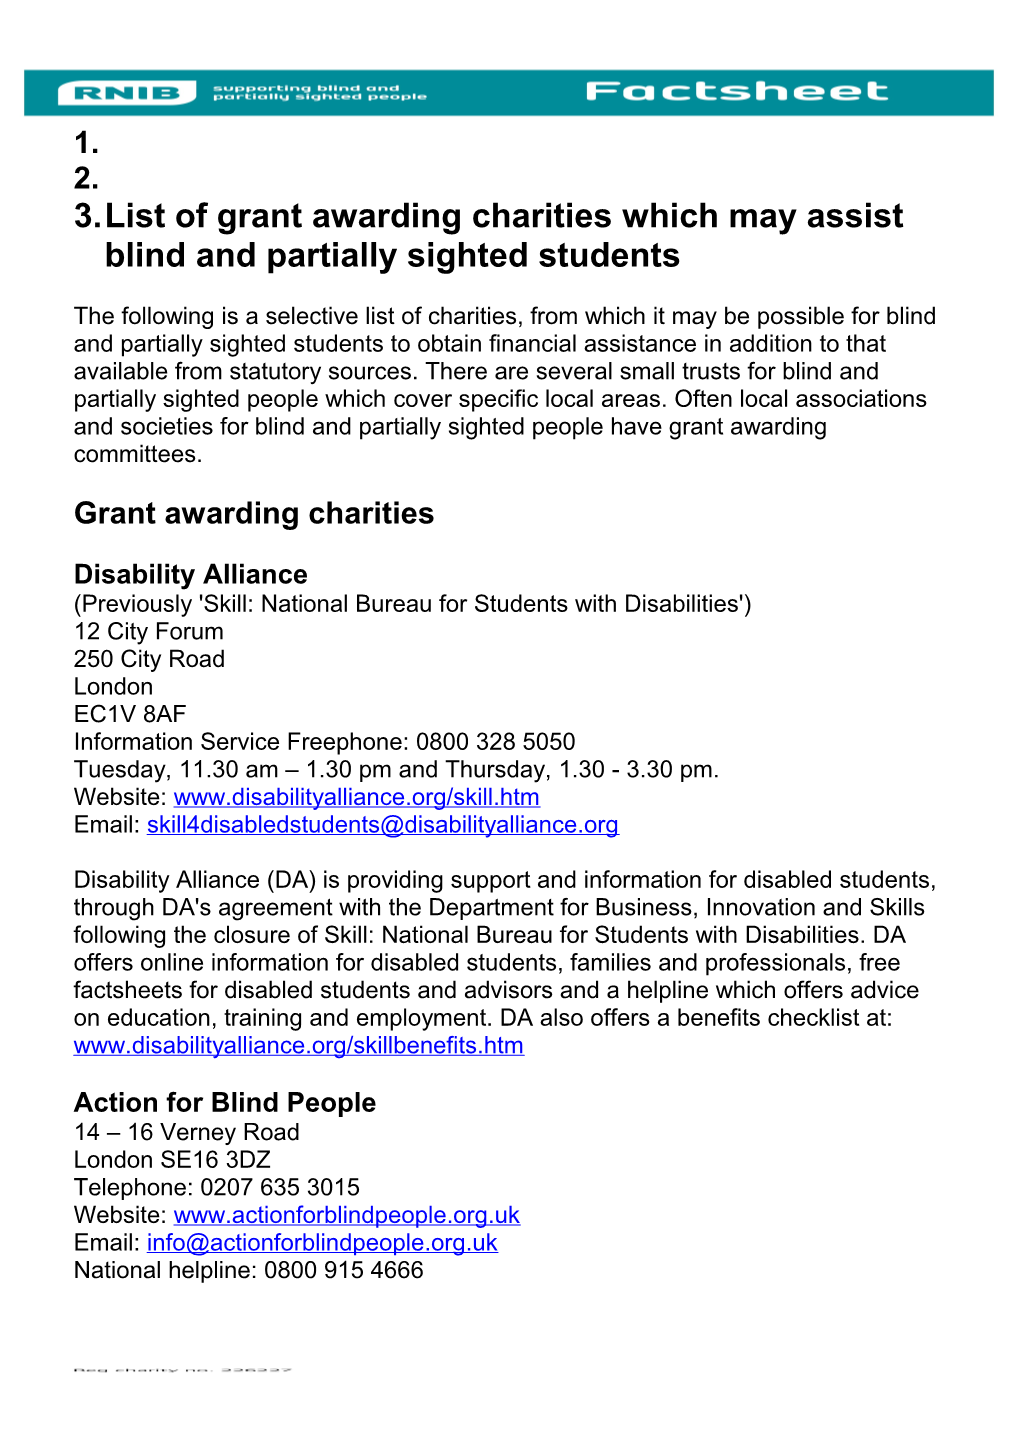 Grants for Blind and Partially Sighted Students